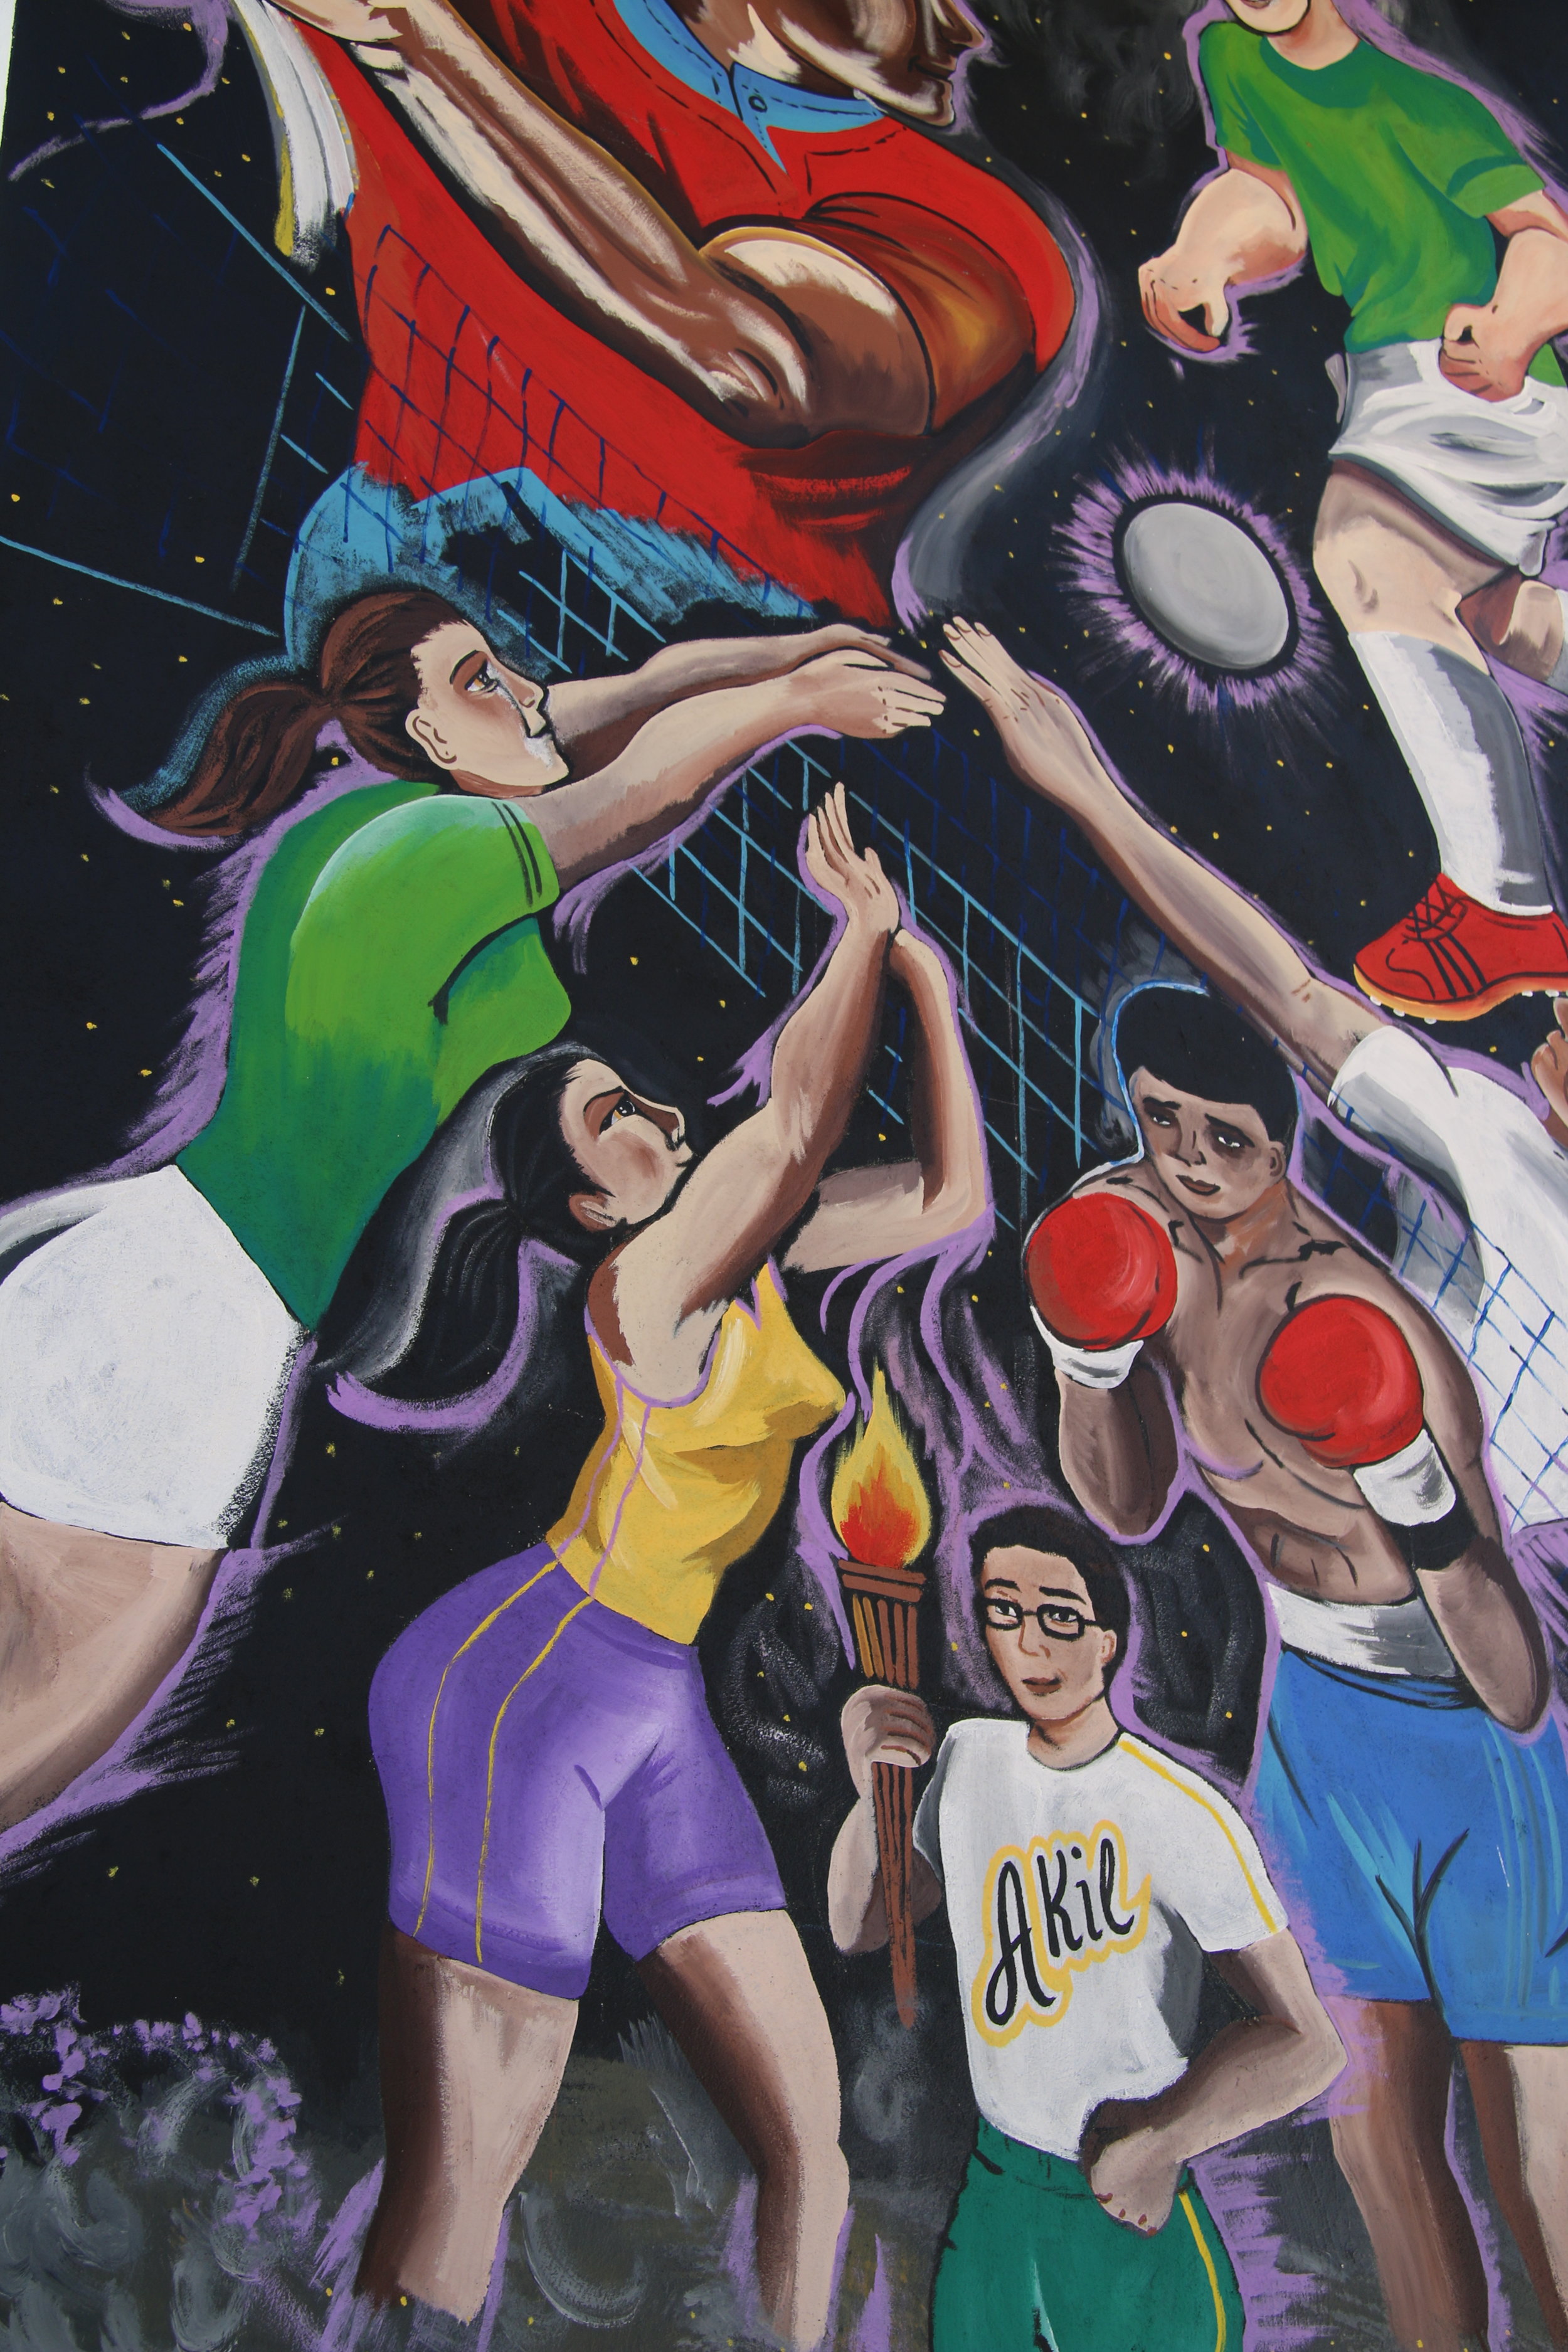  Mural detail - homage to the athletes of Akil 